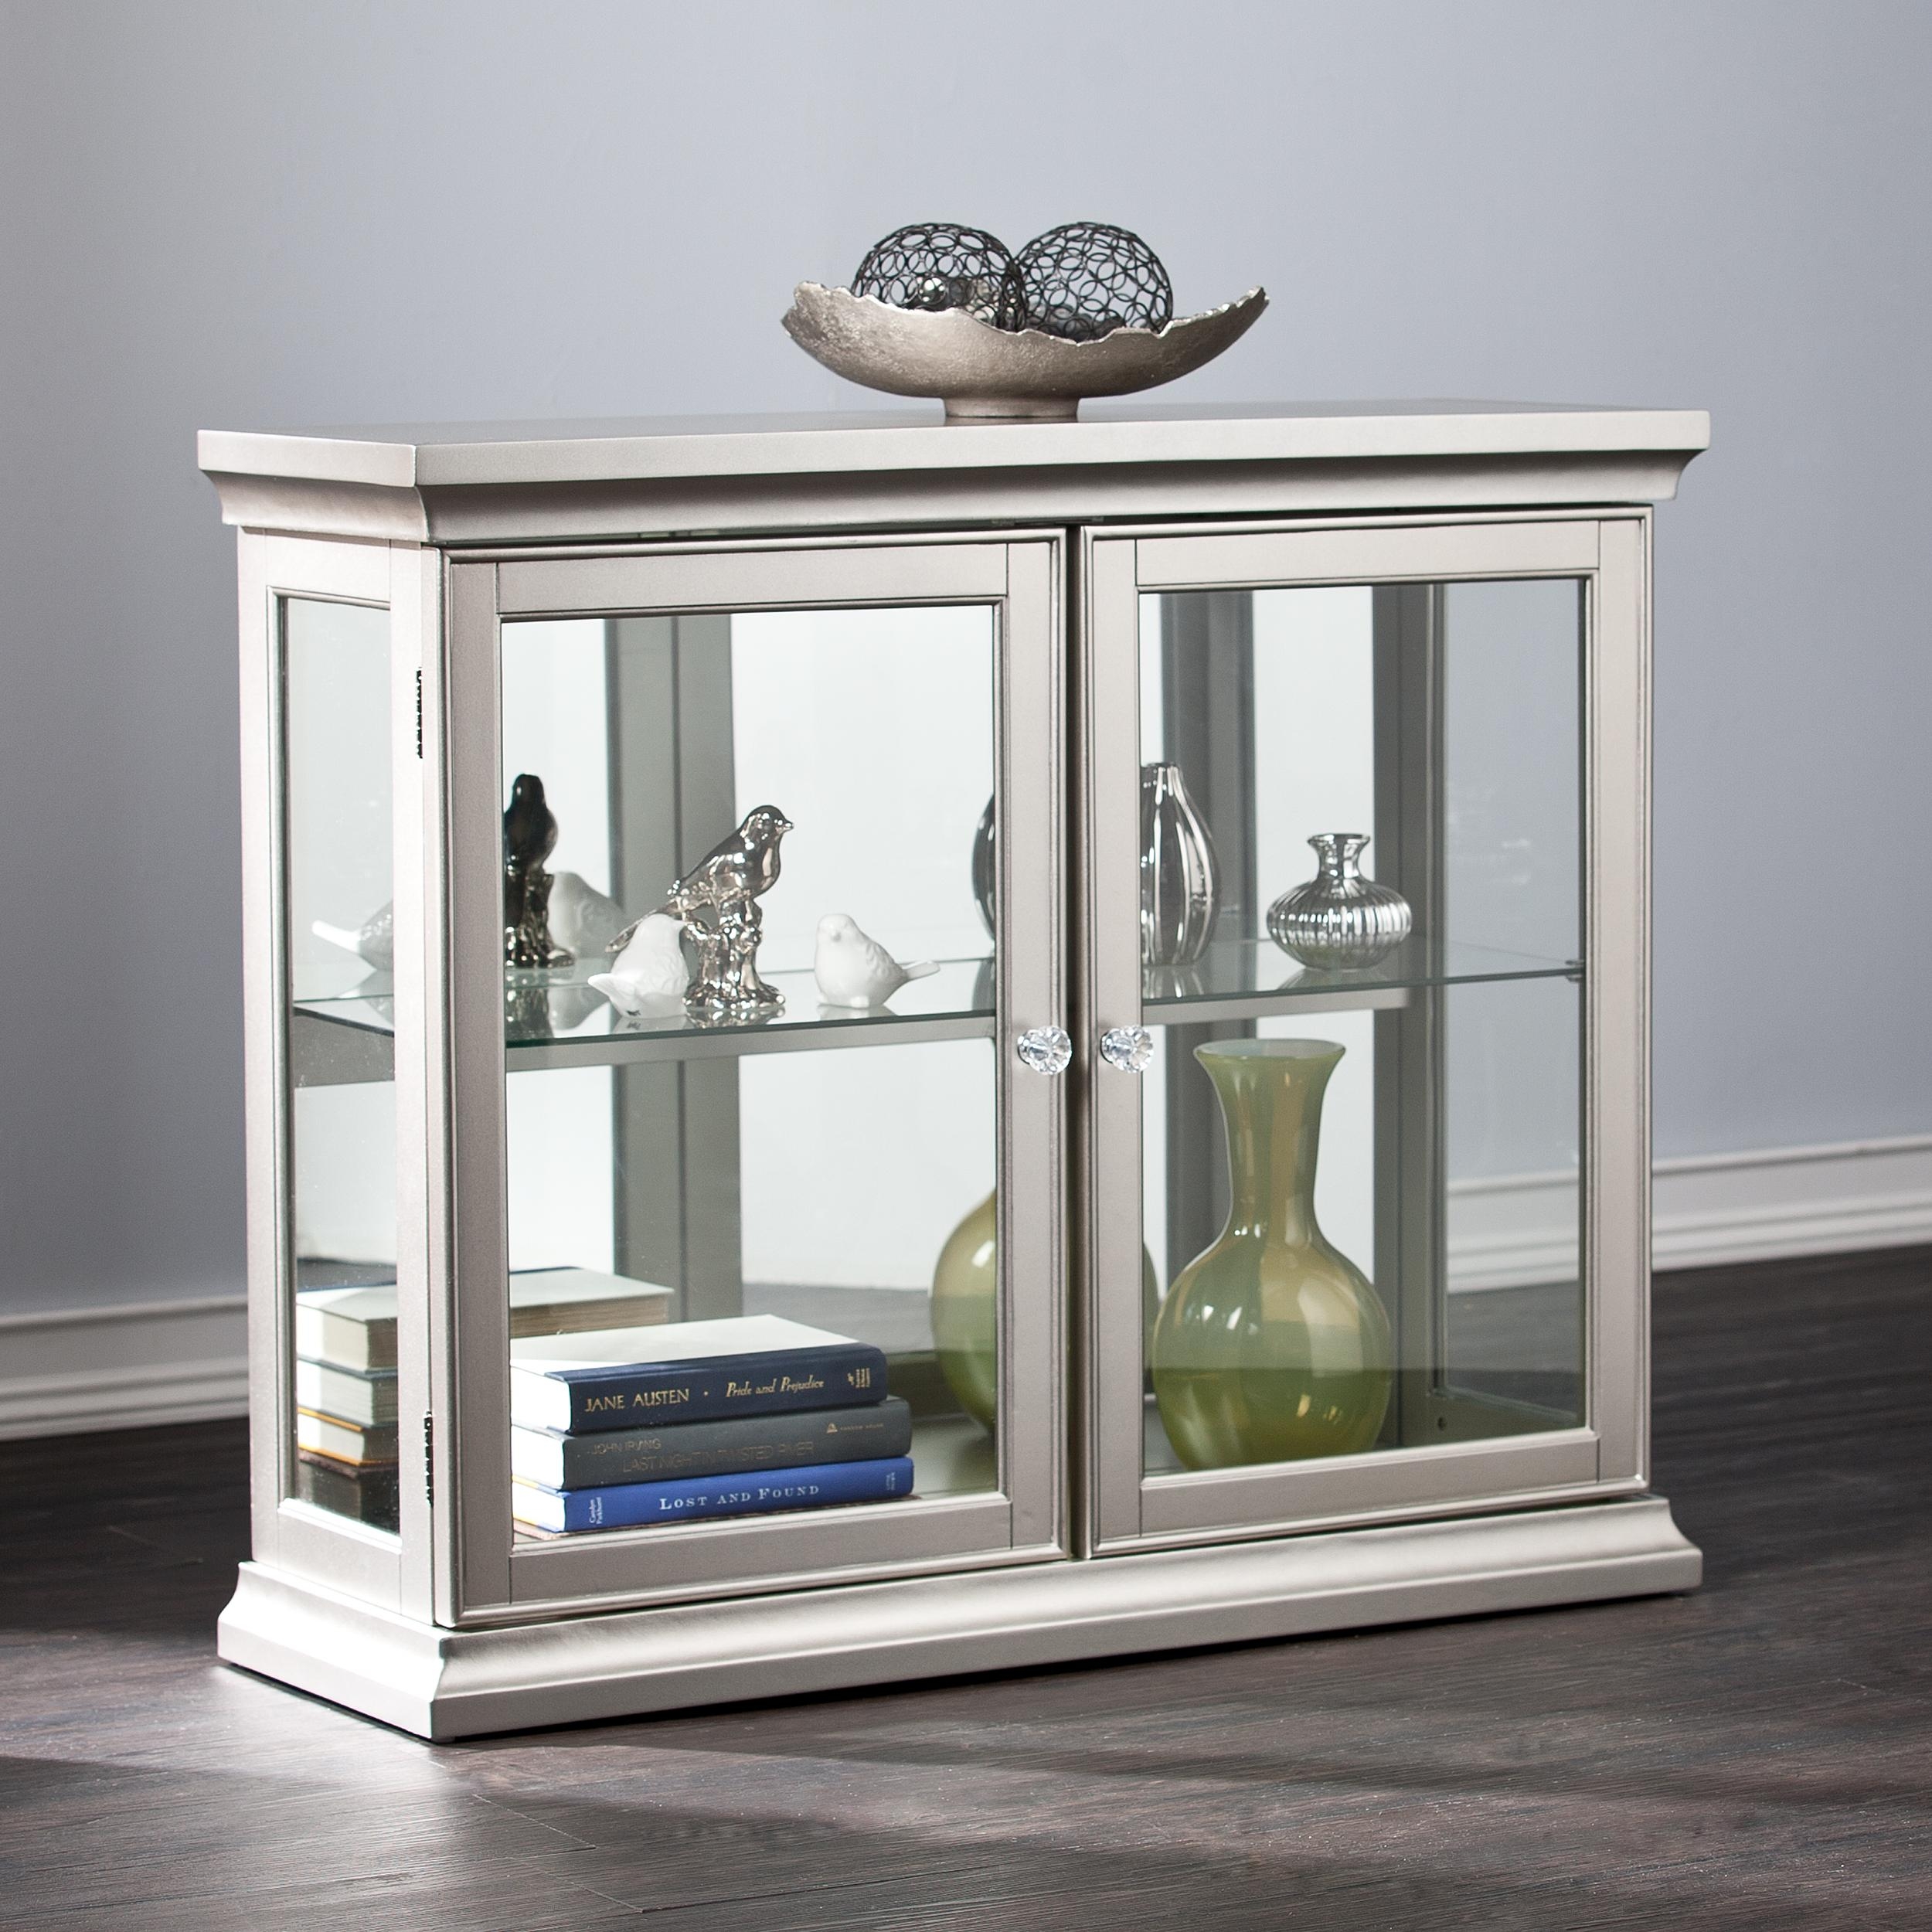 French glass display cabinets